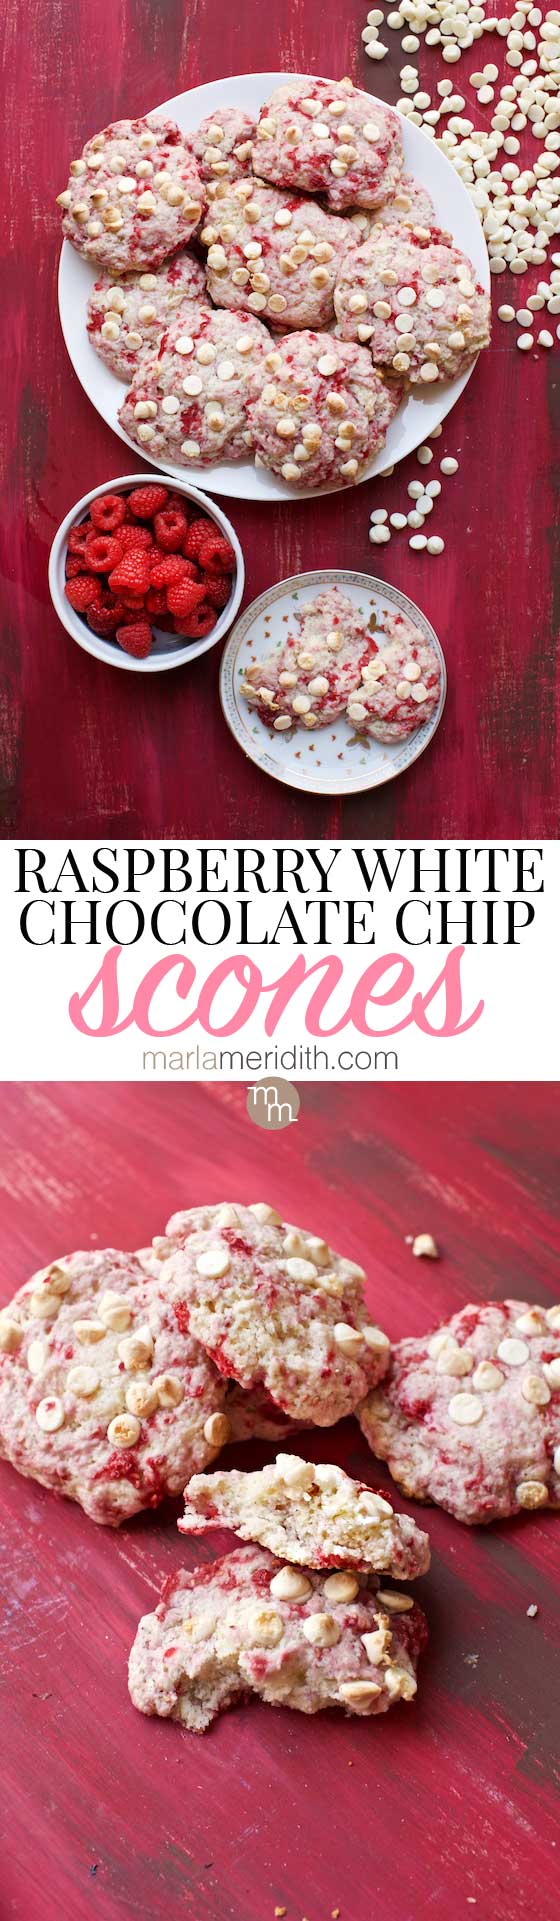 Raspberry White Chocolate Chip Scones are a favorite recipe in our house! MarlaMeridith.com #scones #baking #recipe